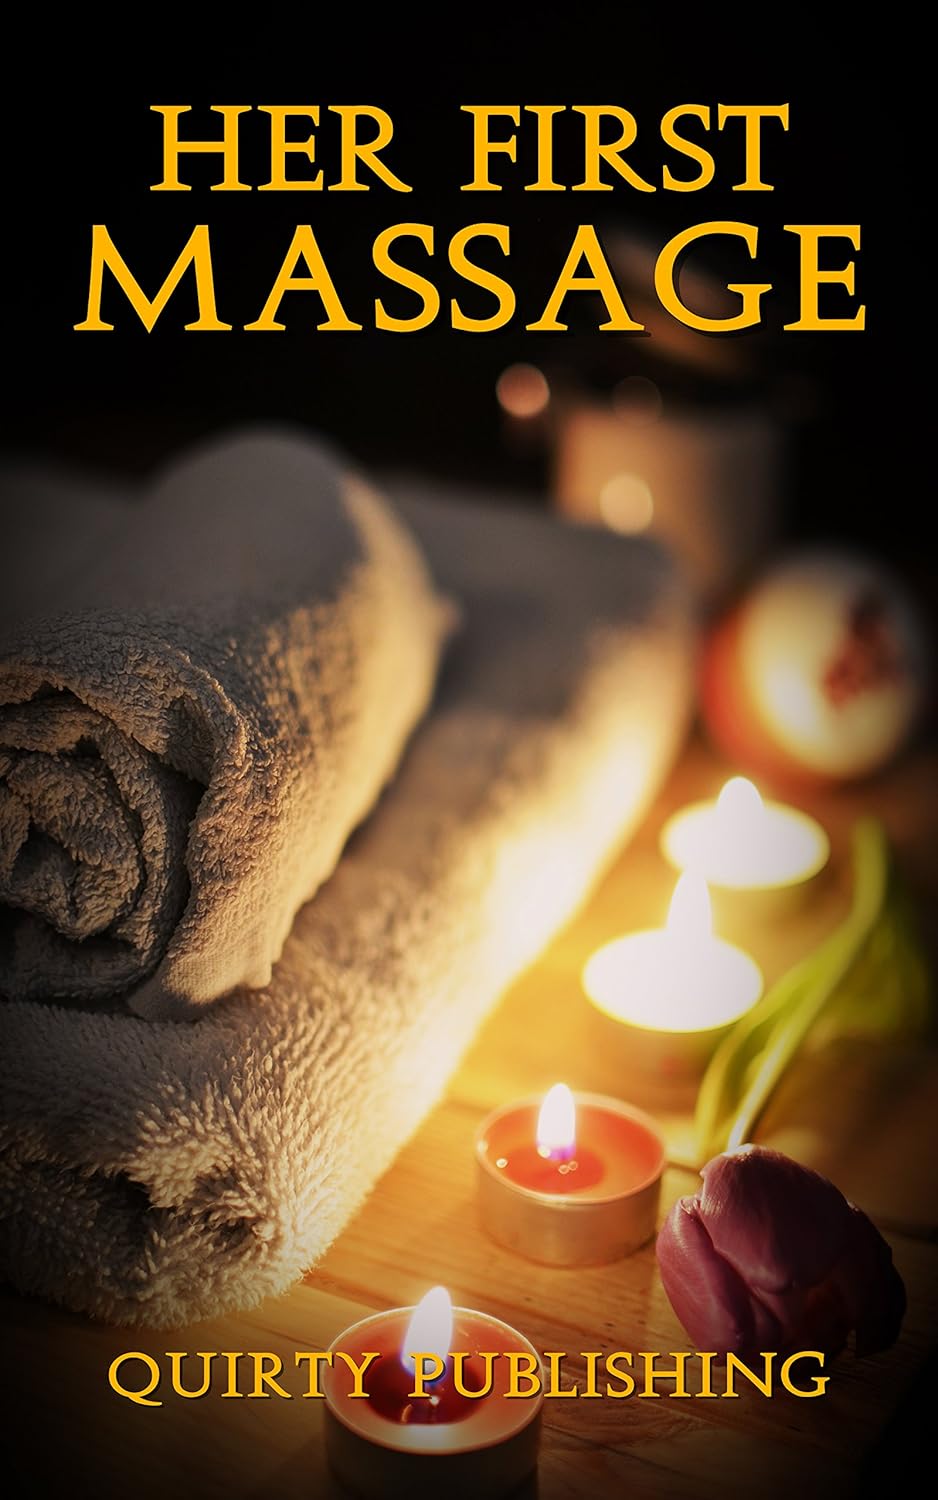 clarence loong recommends lezbian massage pic